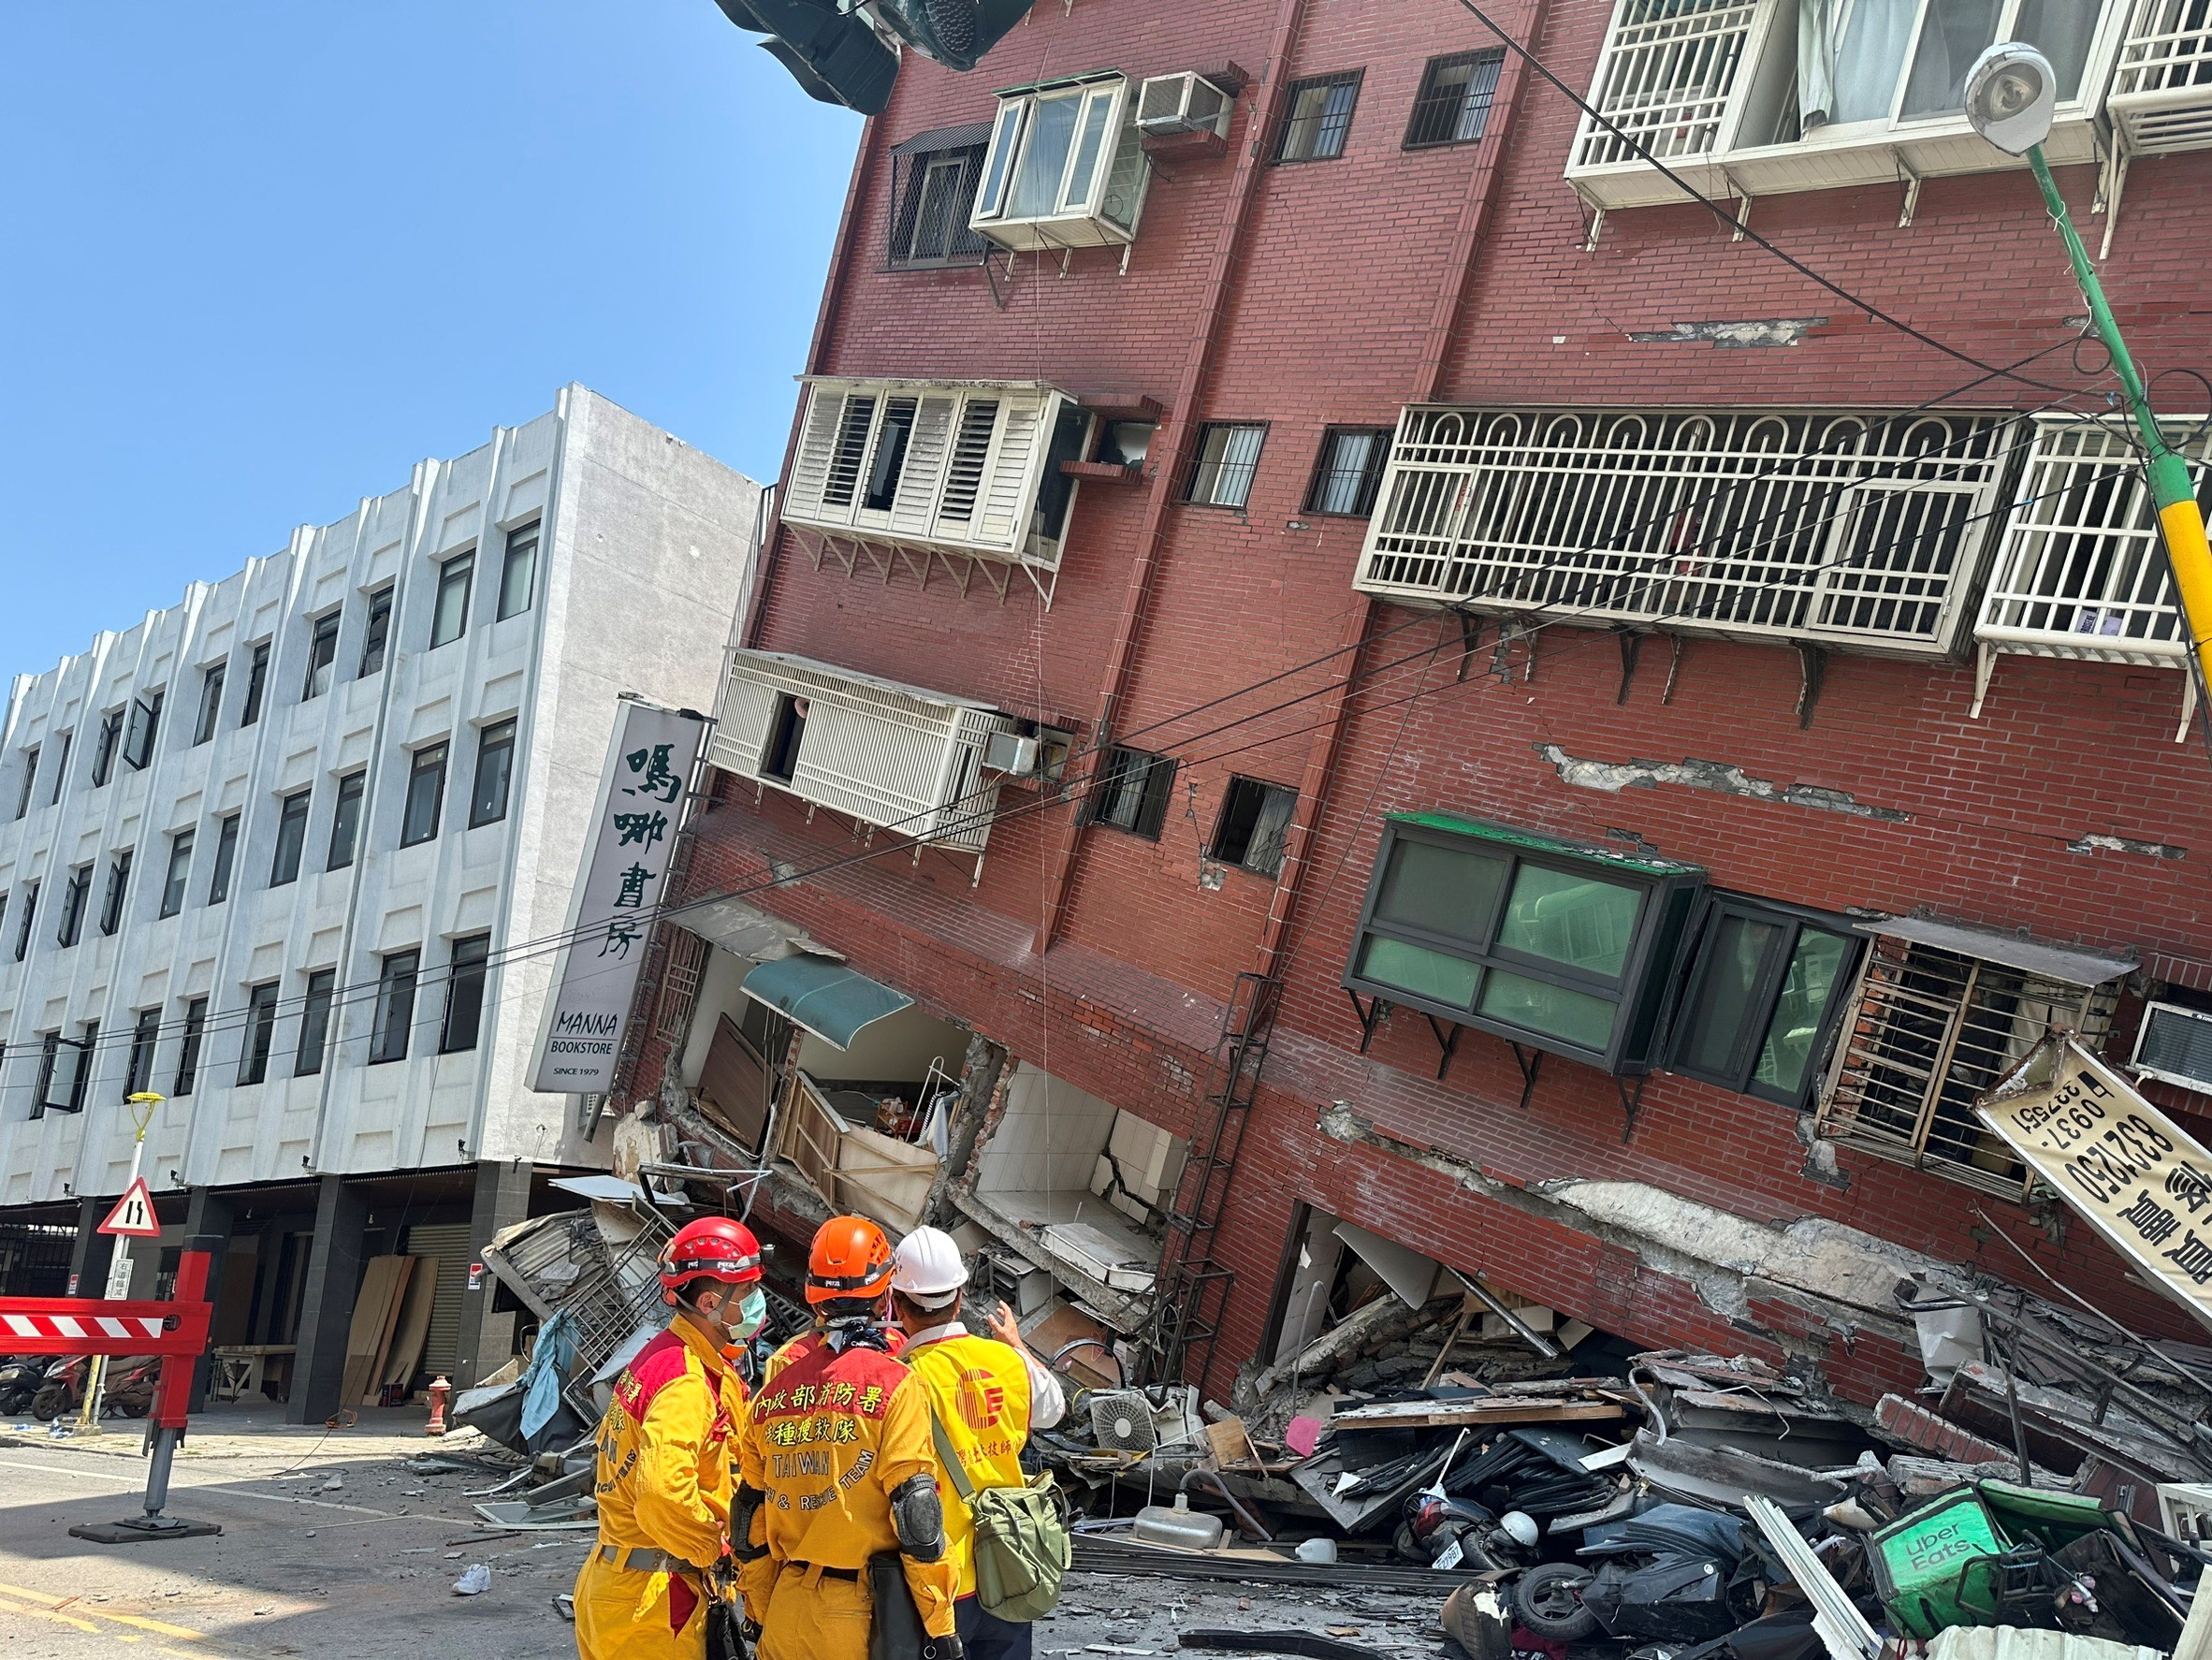 Firefighters work at the site where a building collapsed following the earthquake, in Hualien, Taiwan on April 3.